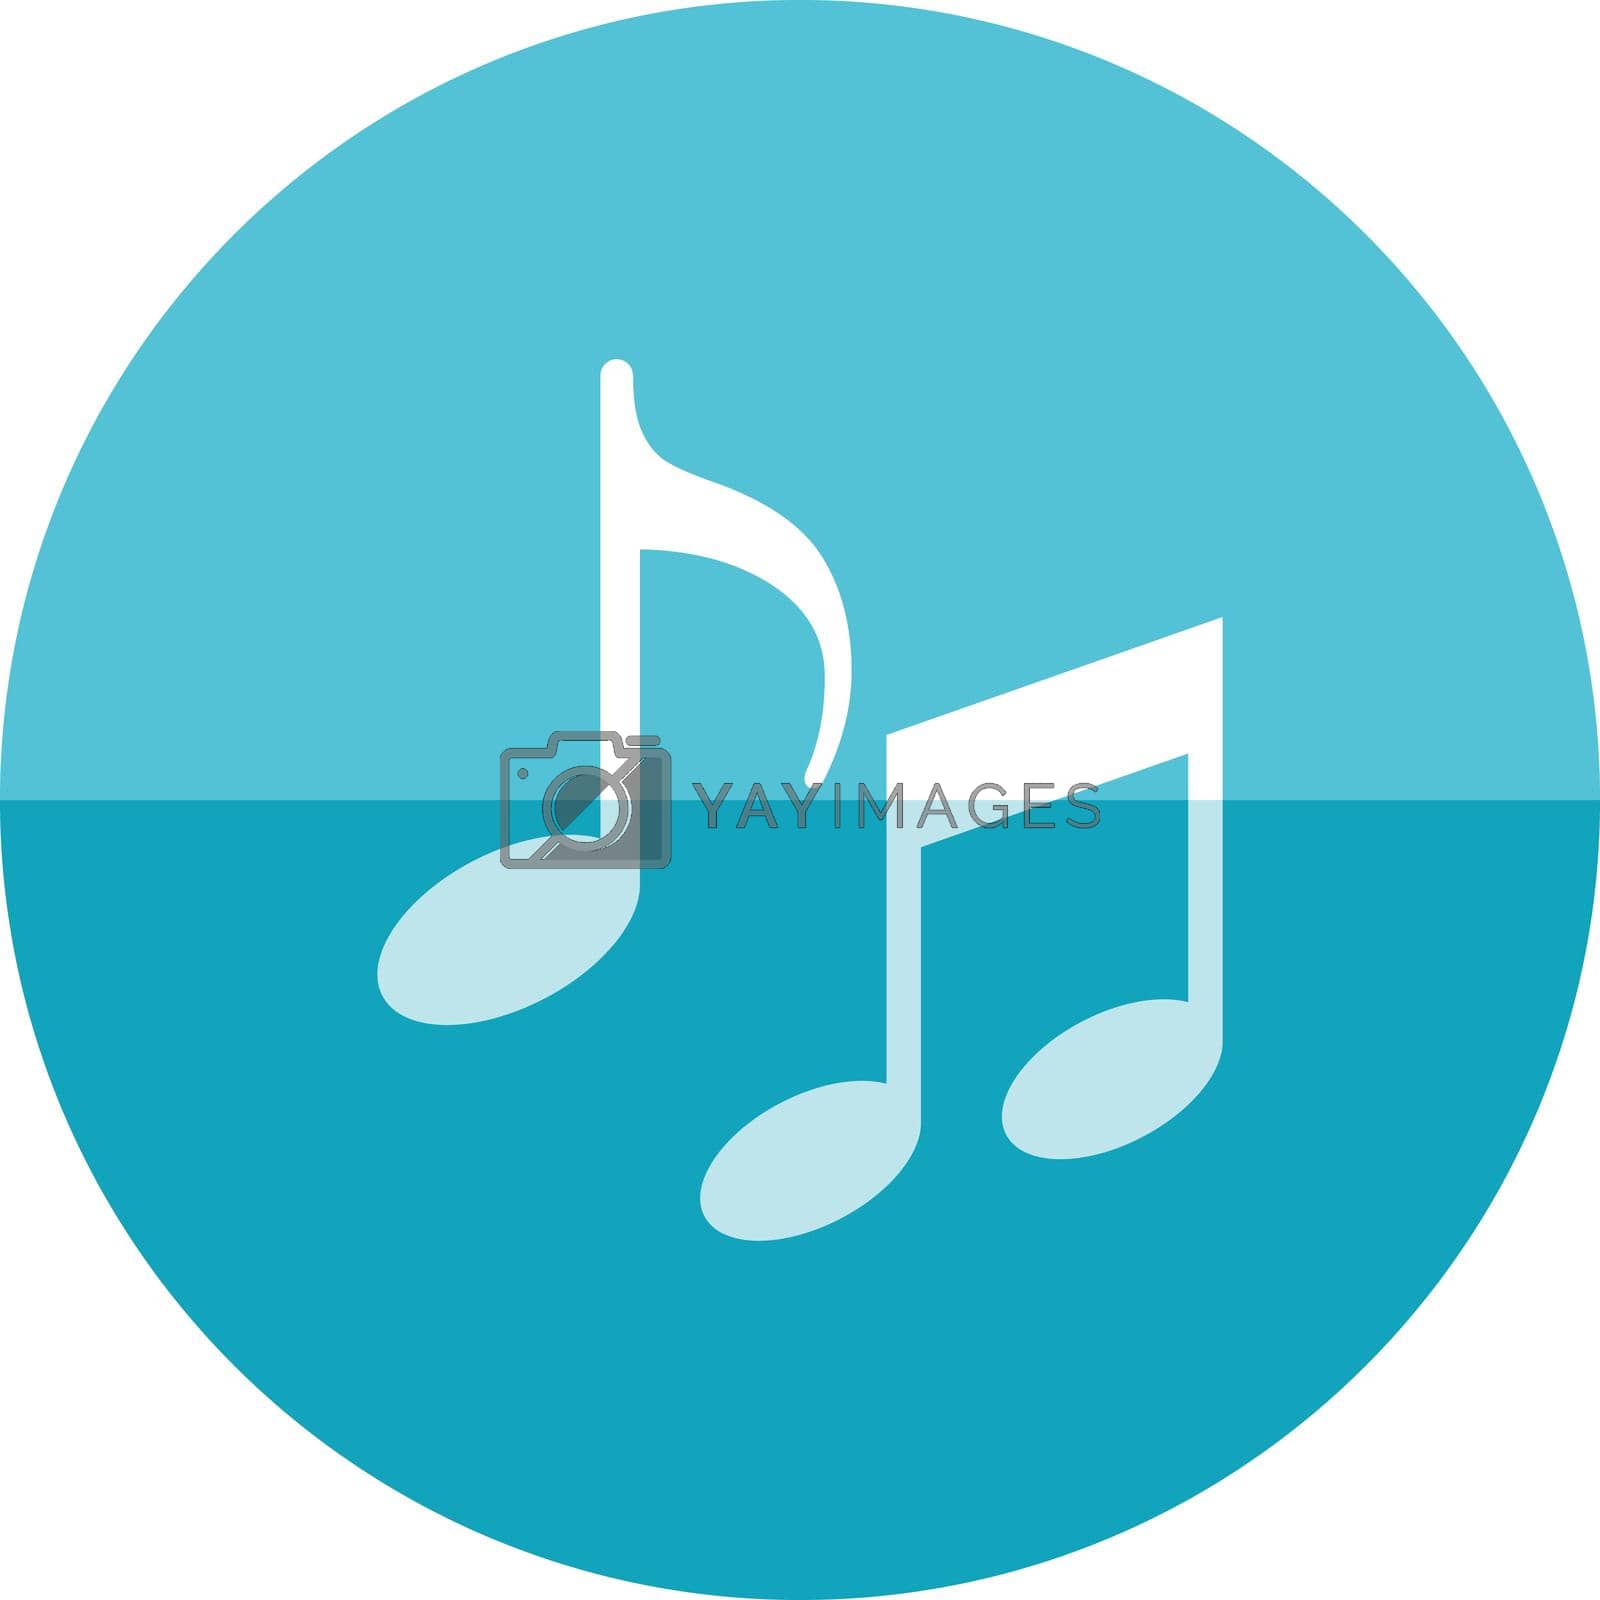 Royalty free image of Circle icon - Music notes by puruan